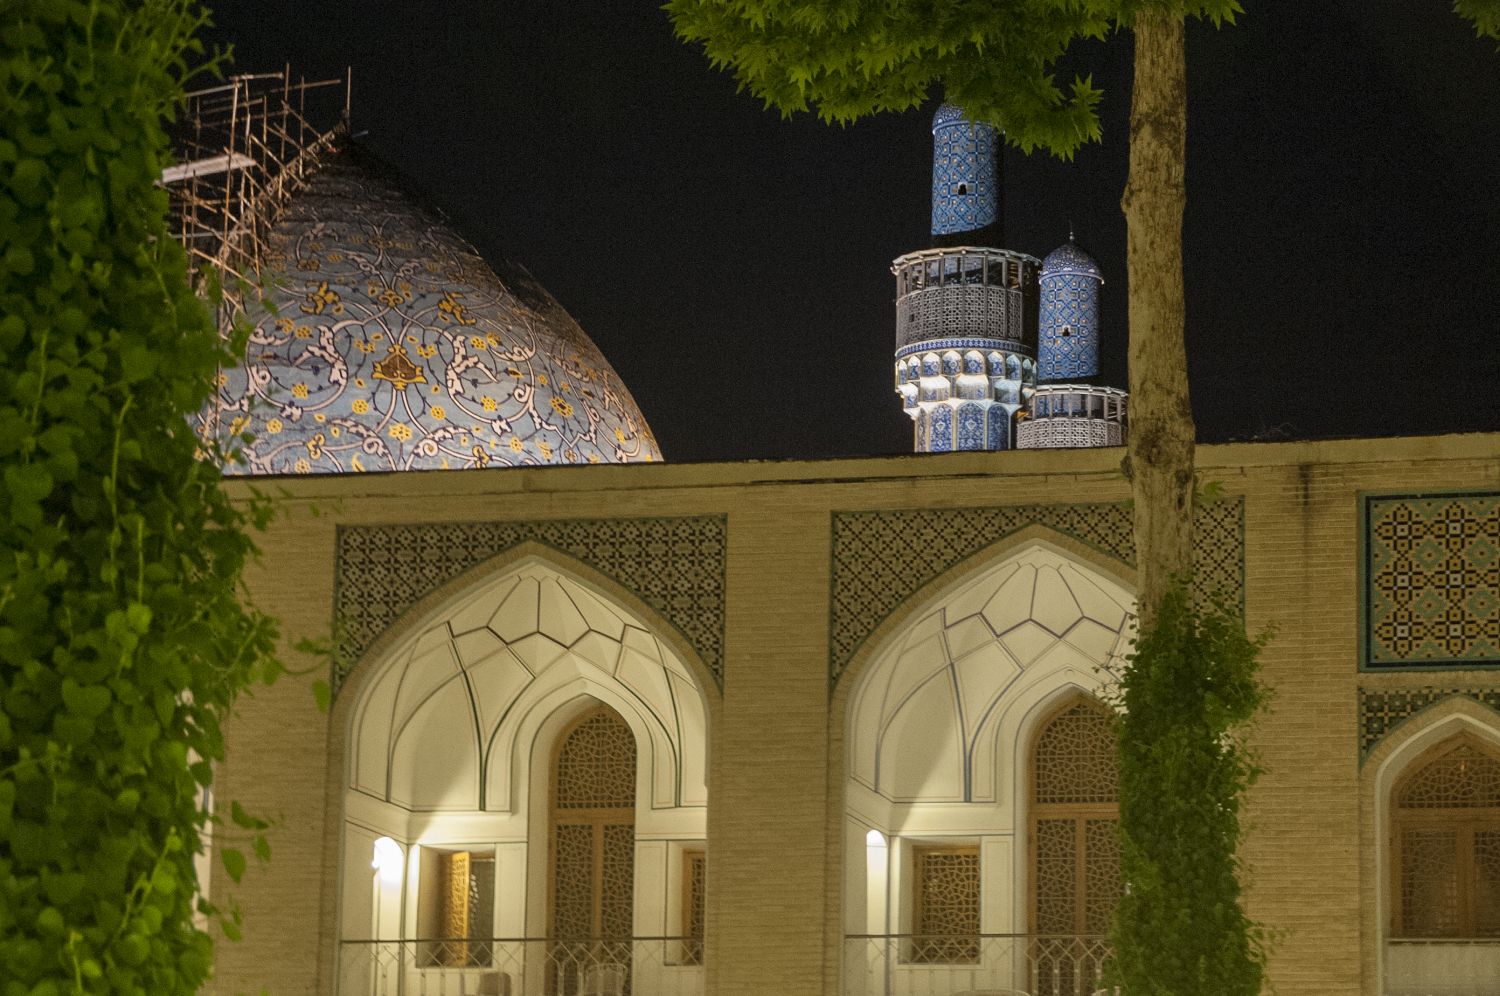 Night view over southern facade of courtyard with dome and minarets of Madrasa-i Madar-i Shah visible in background.